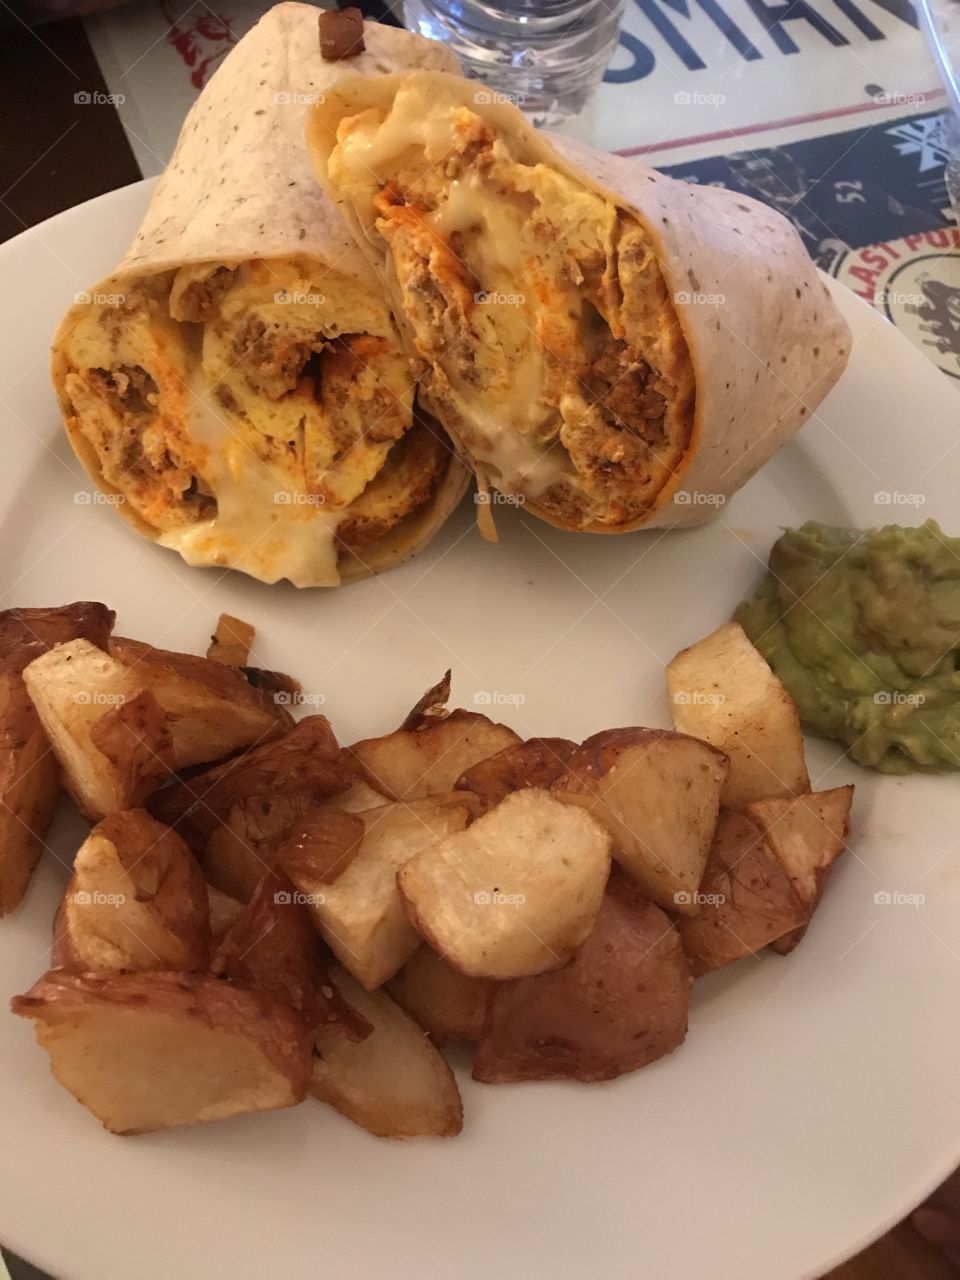 Breakfast burrito with potatoes. A hangover’s dream. Don’t forget the side of guacamole 